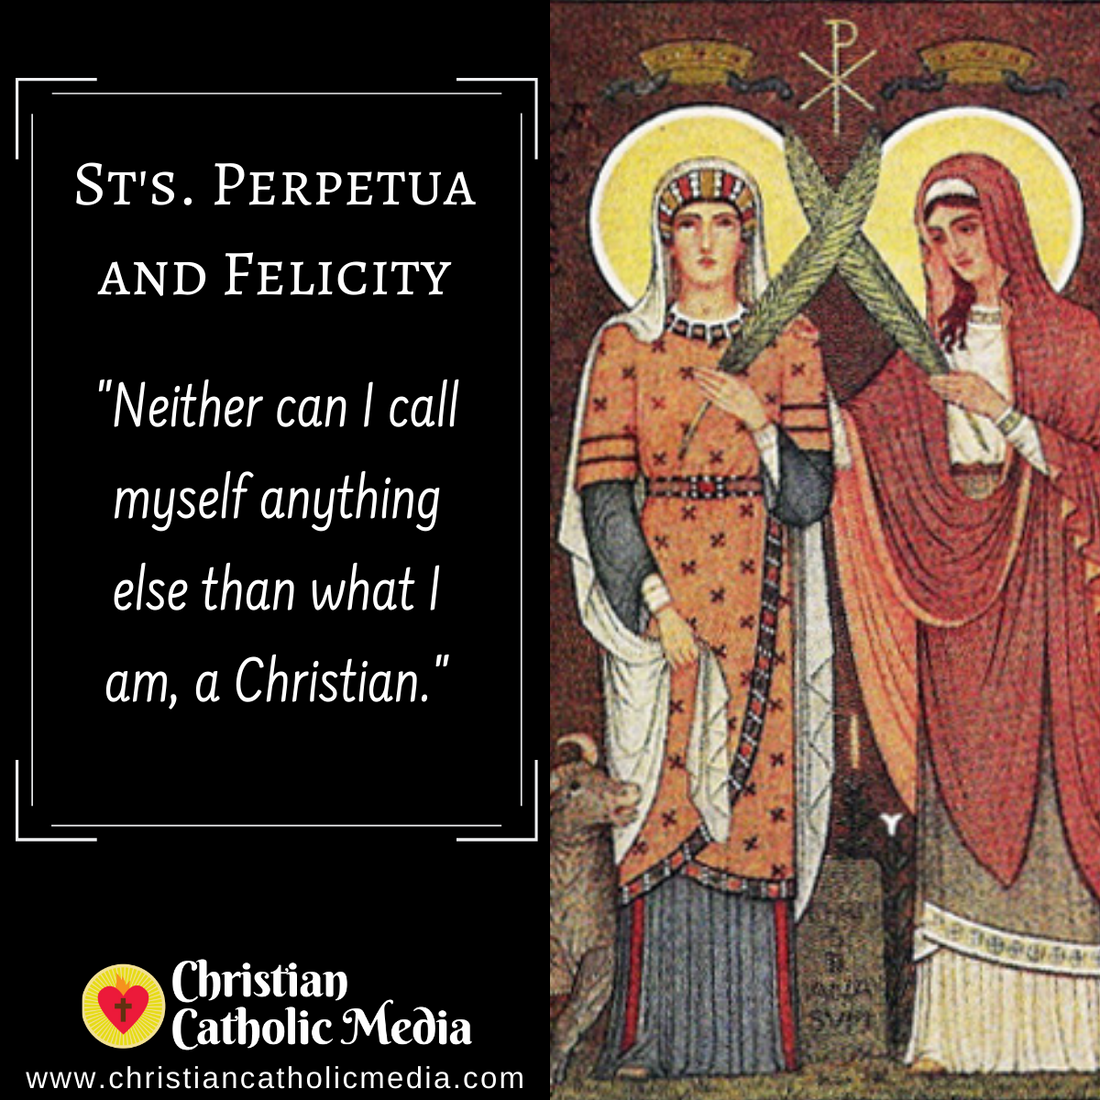 St's. Perpetua and Felicity - Monday March 7, 2022